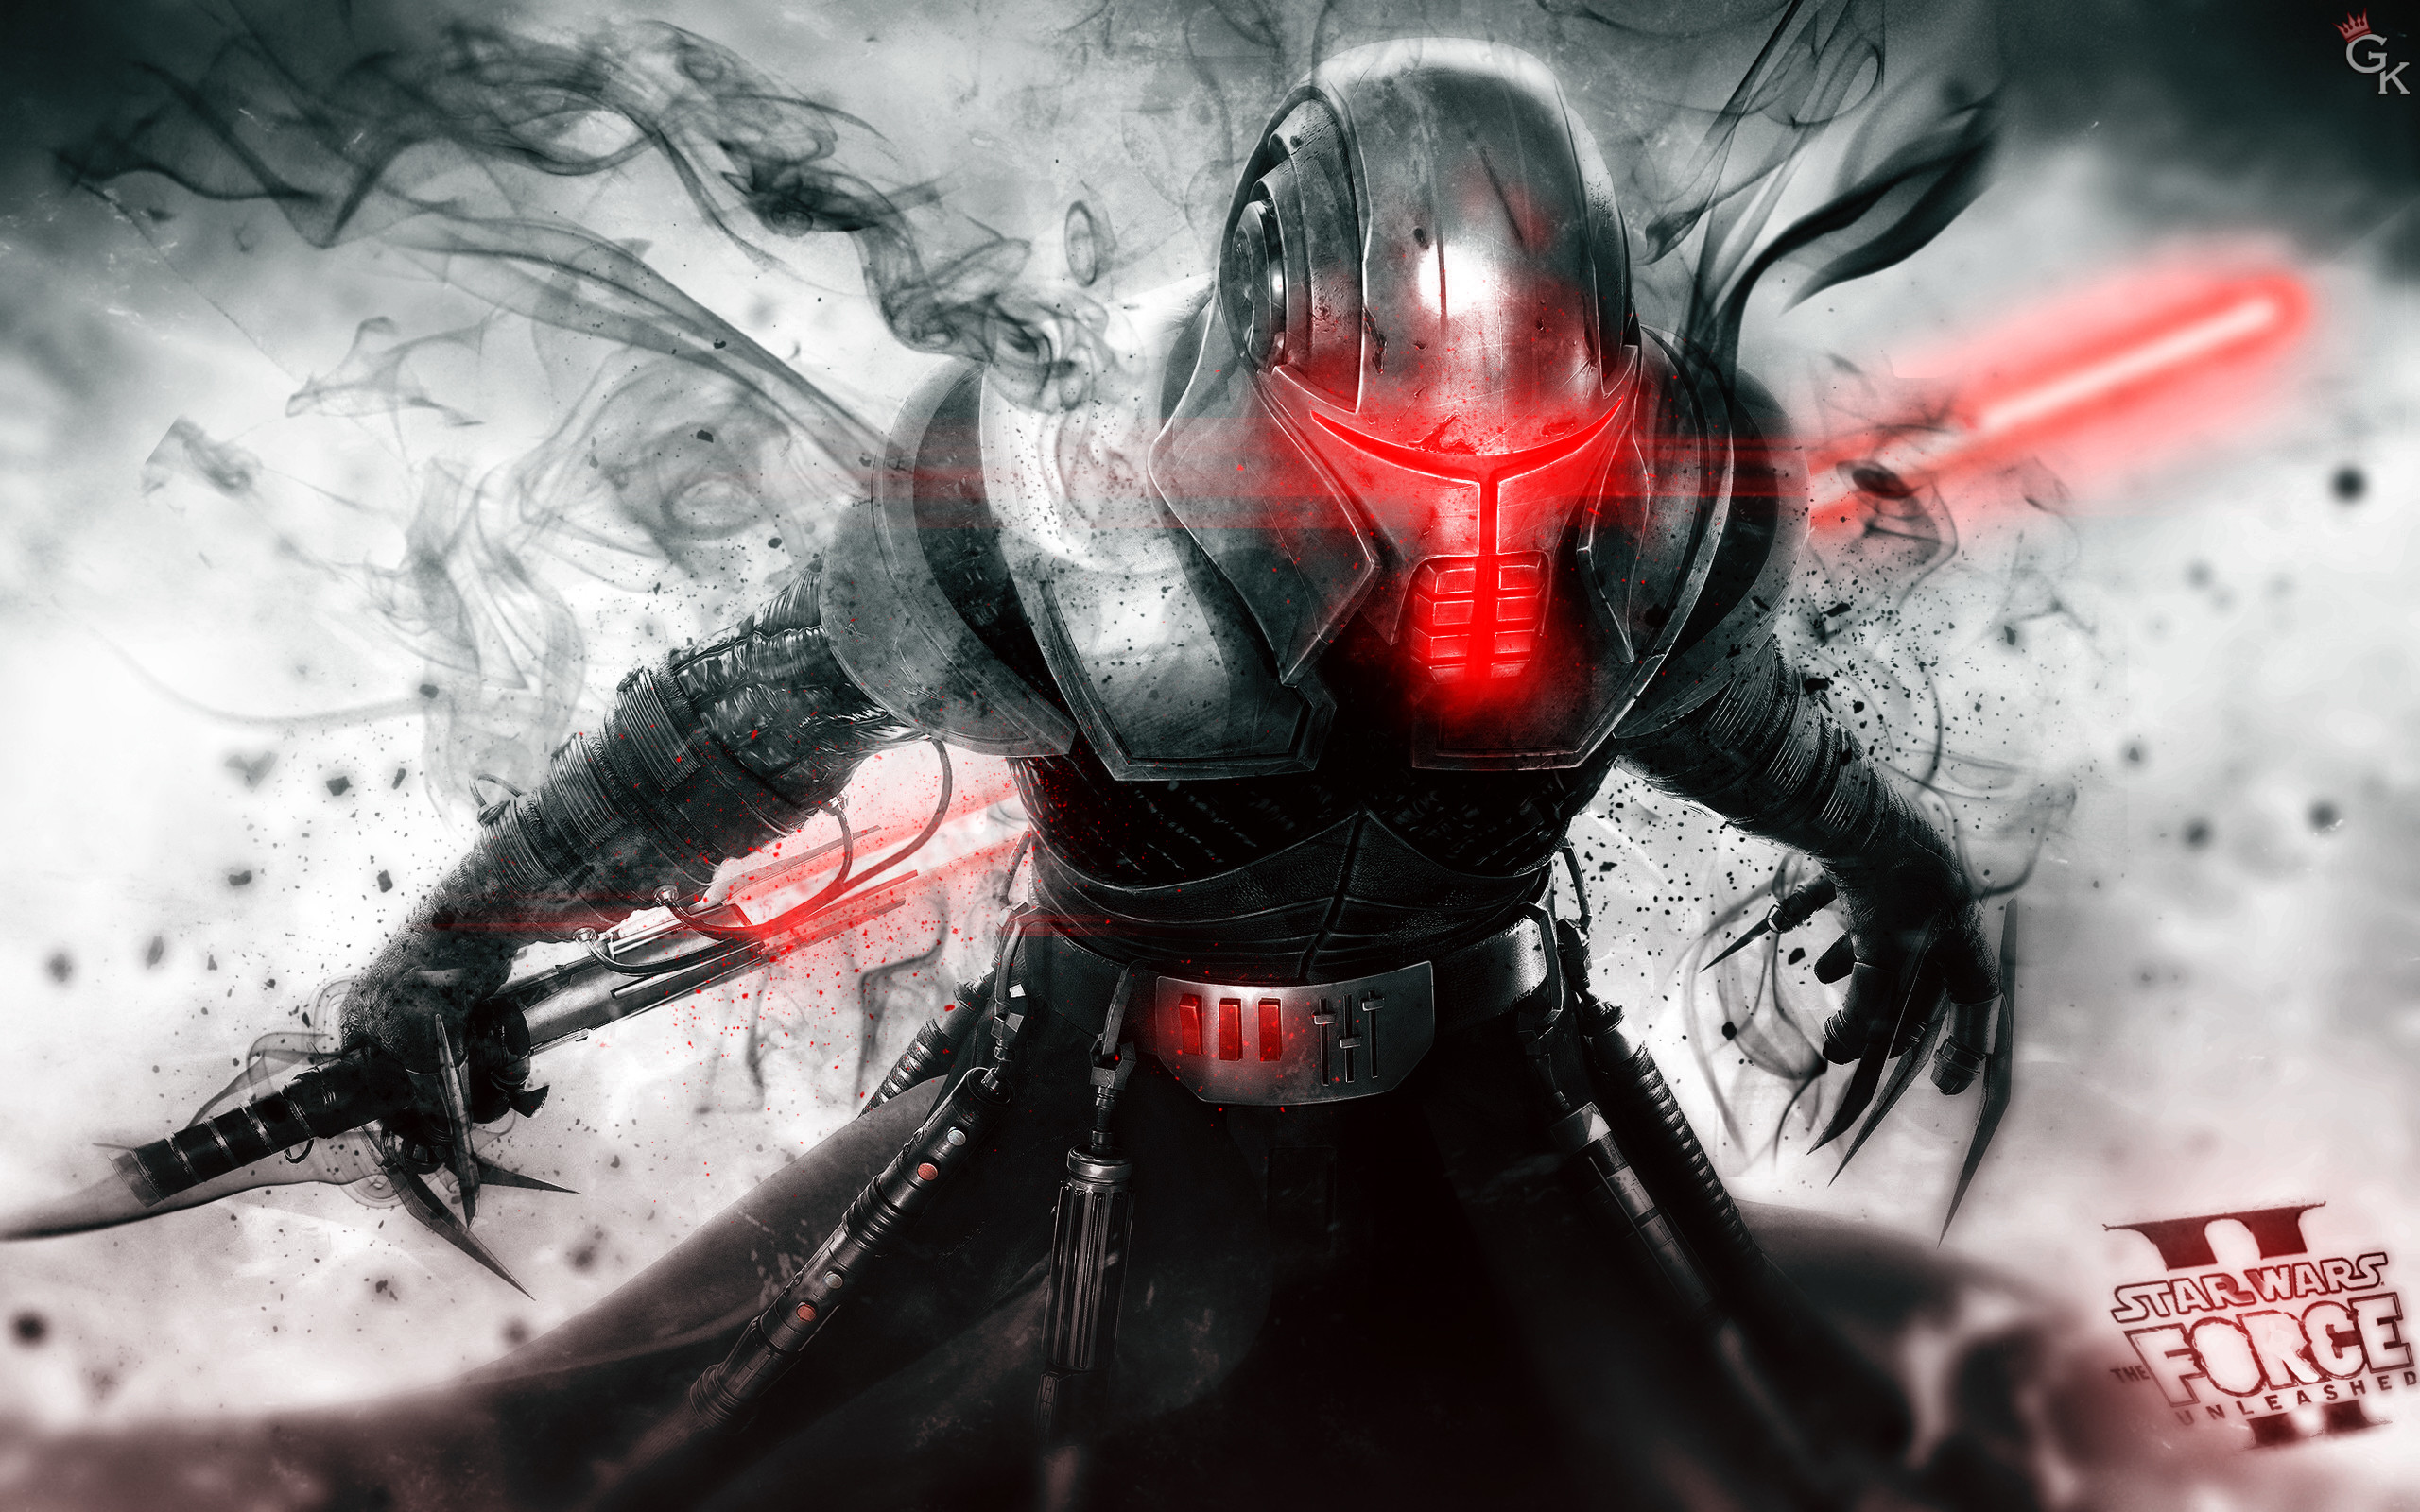 Star Wars Sith Lords Wallpaper 68 images